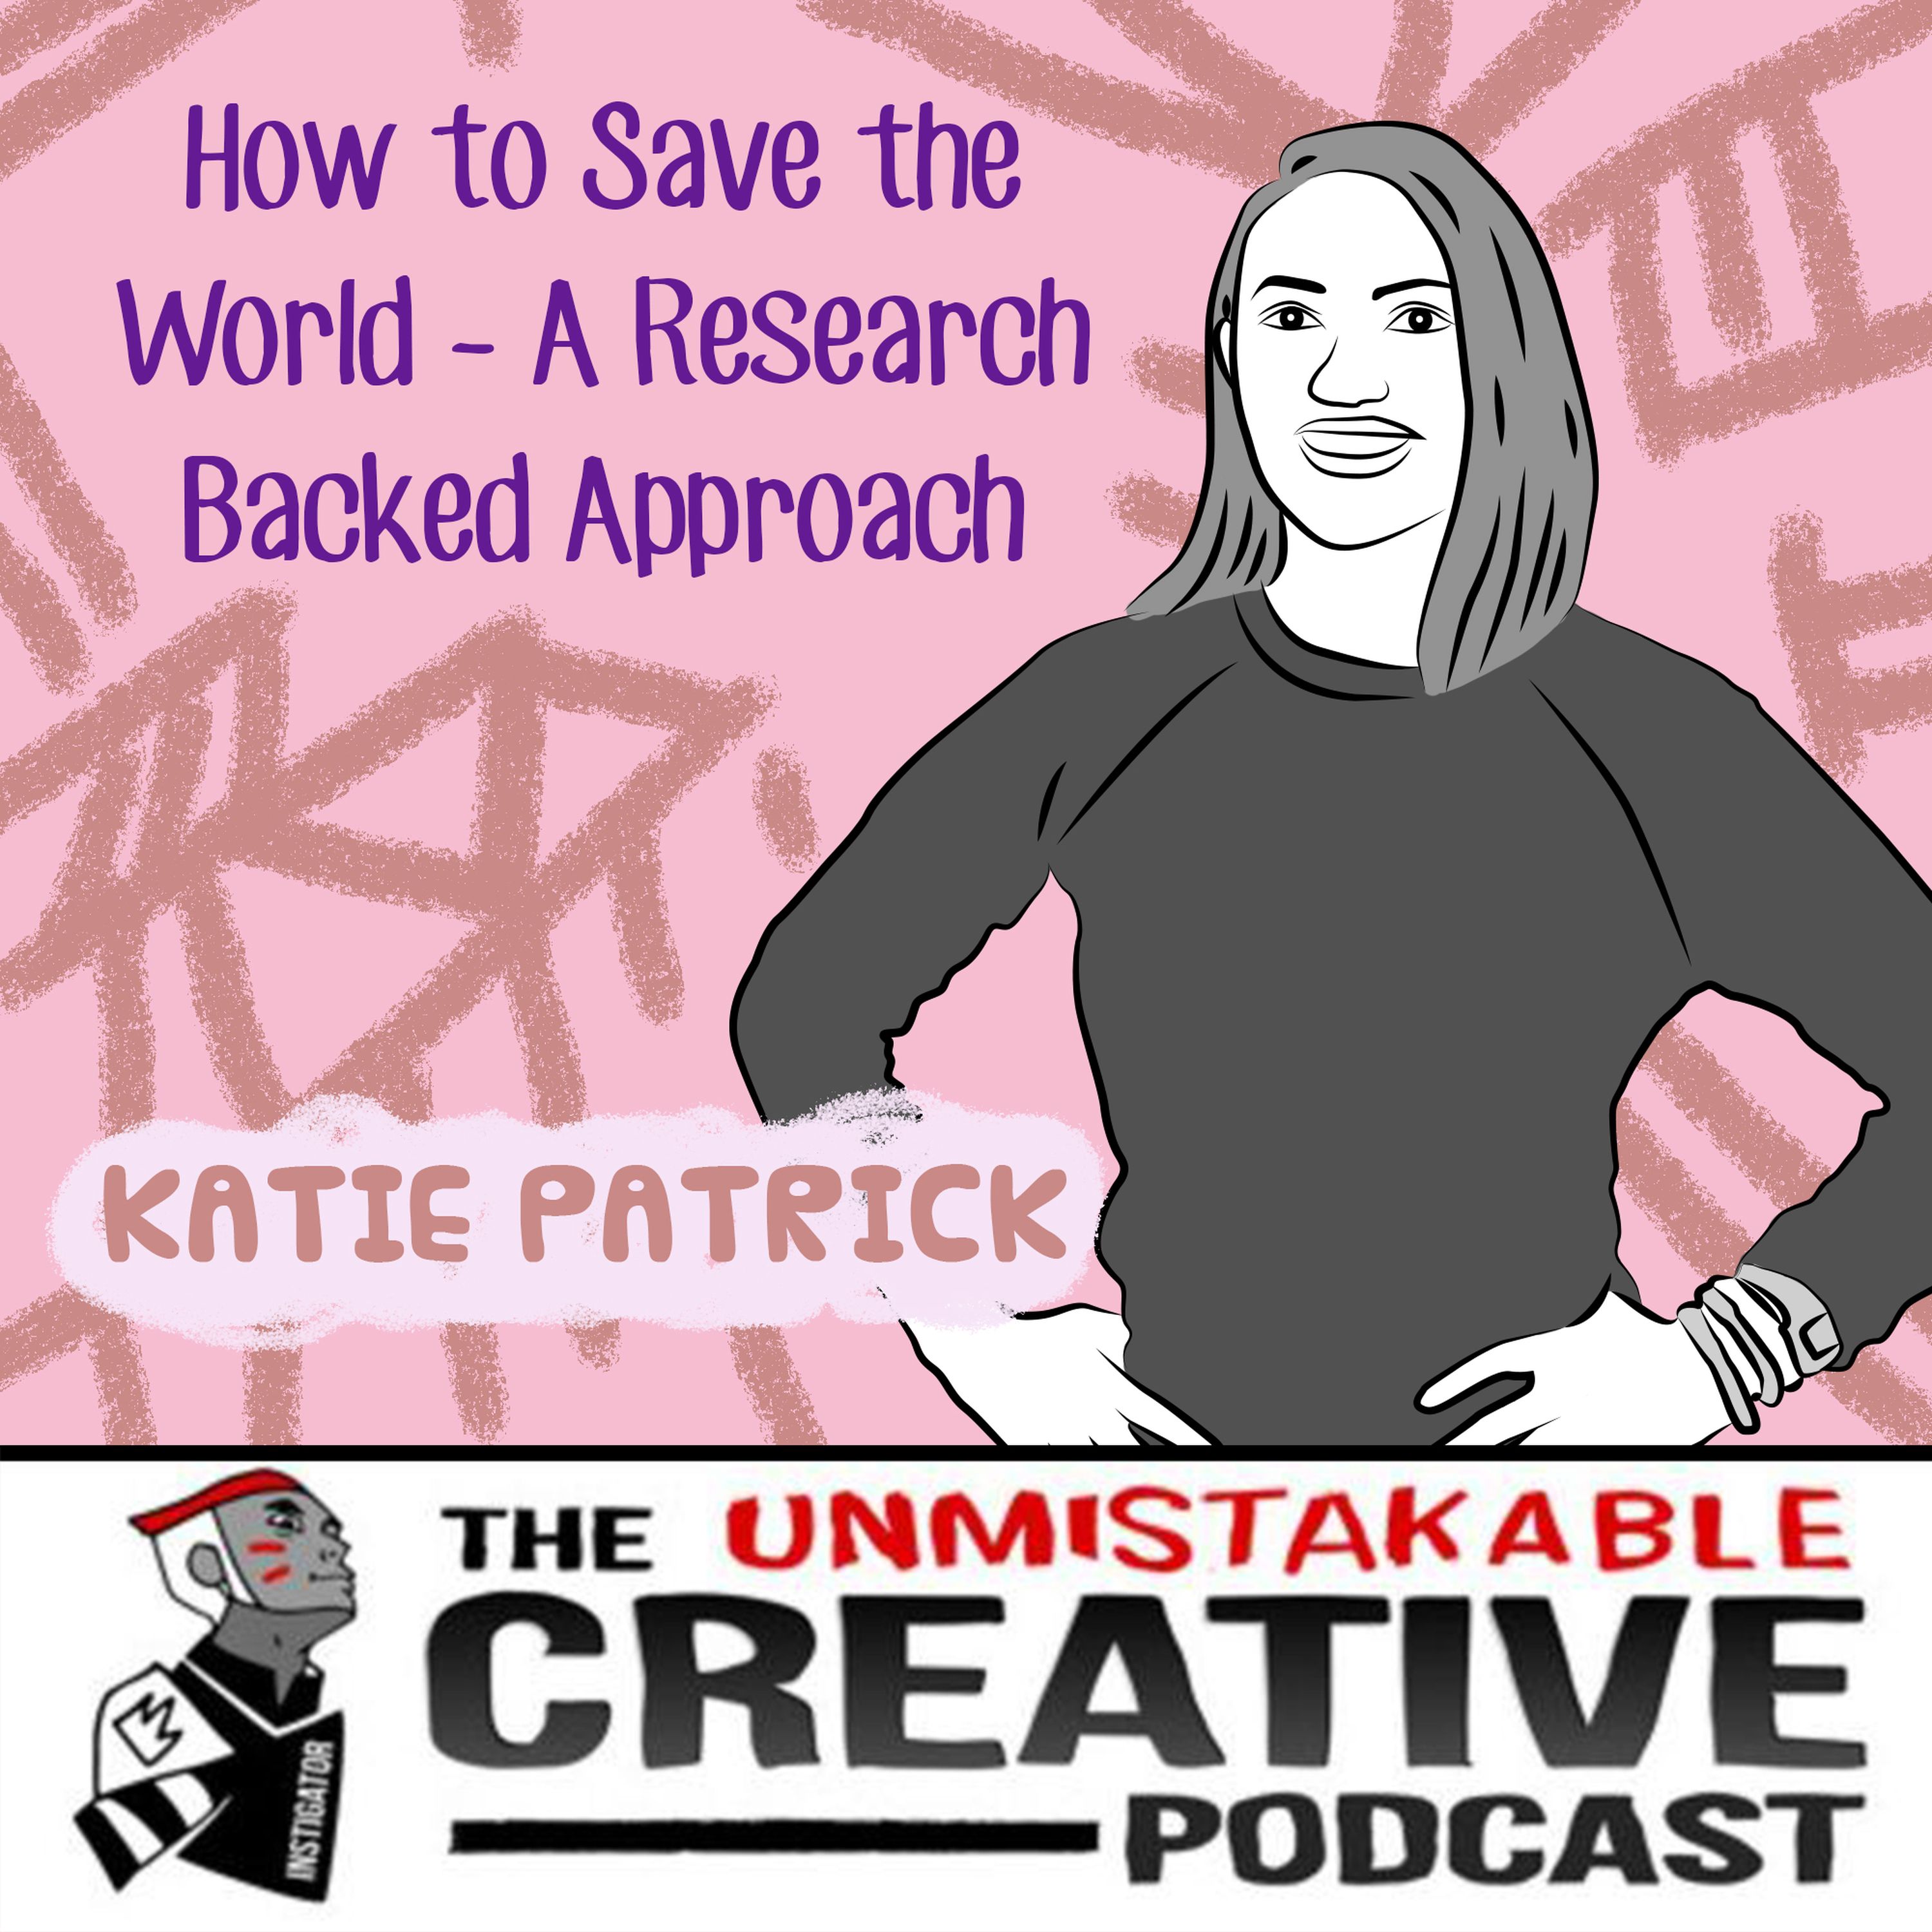 Best of 2019: Katie Patrick: How to Save the World - A Research Backed Approach Image